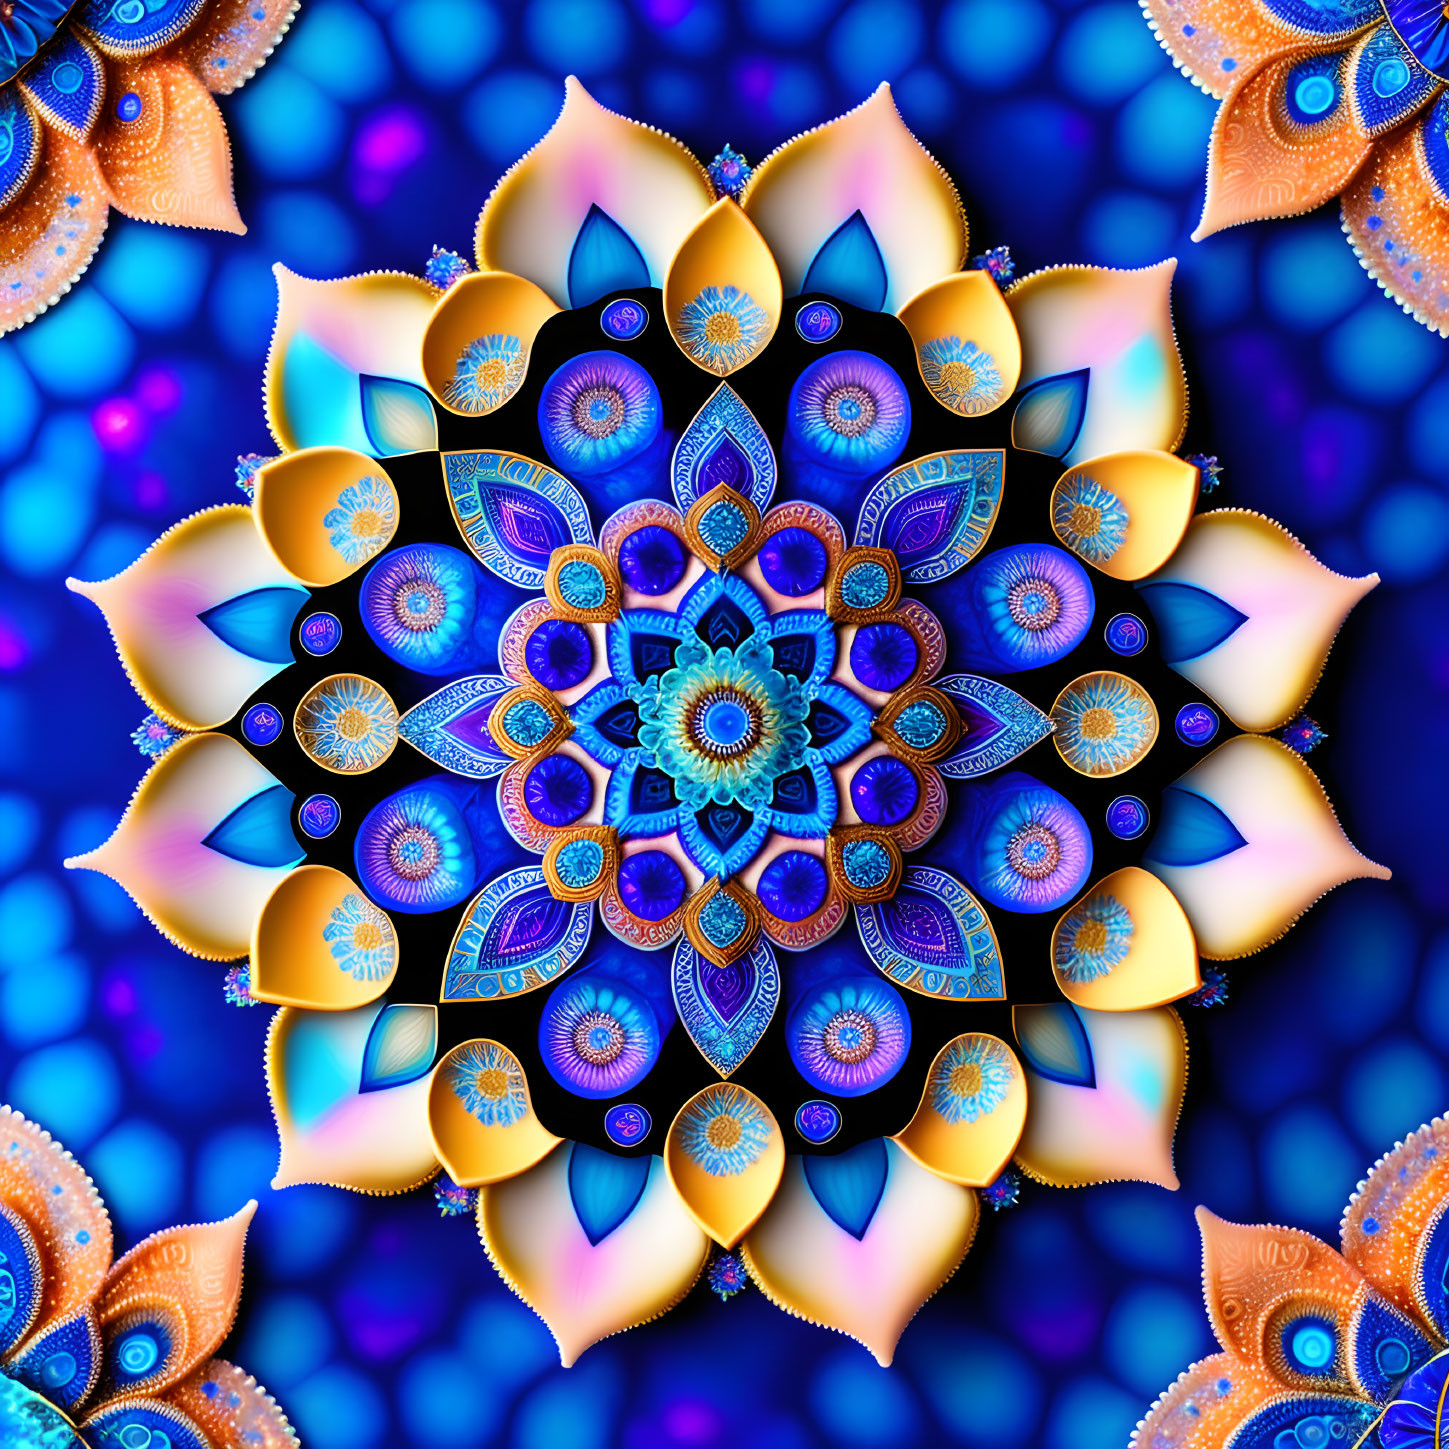 Colorful digital mandala with intricate blue, gold, and purple patterns